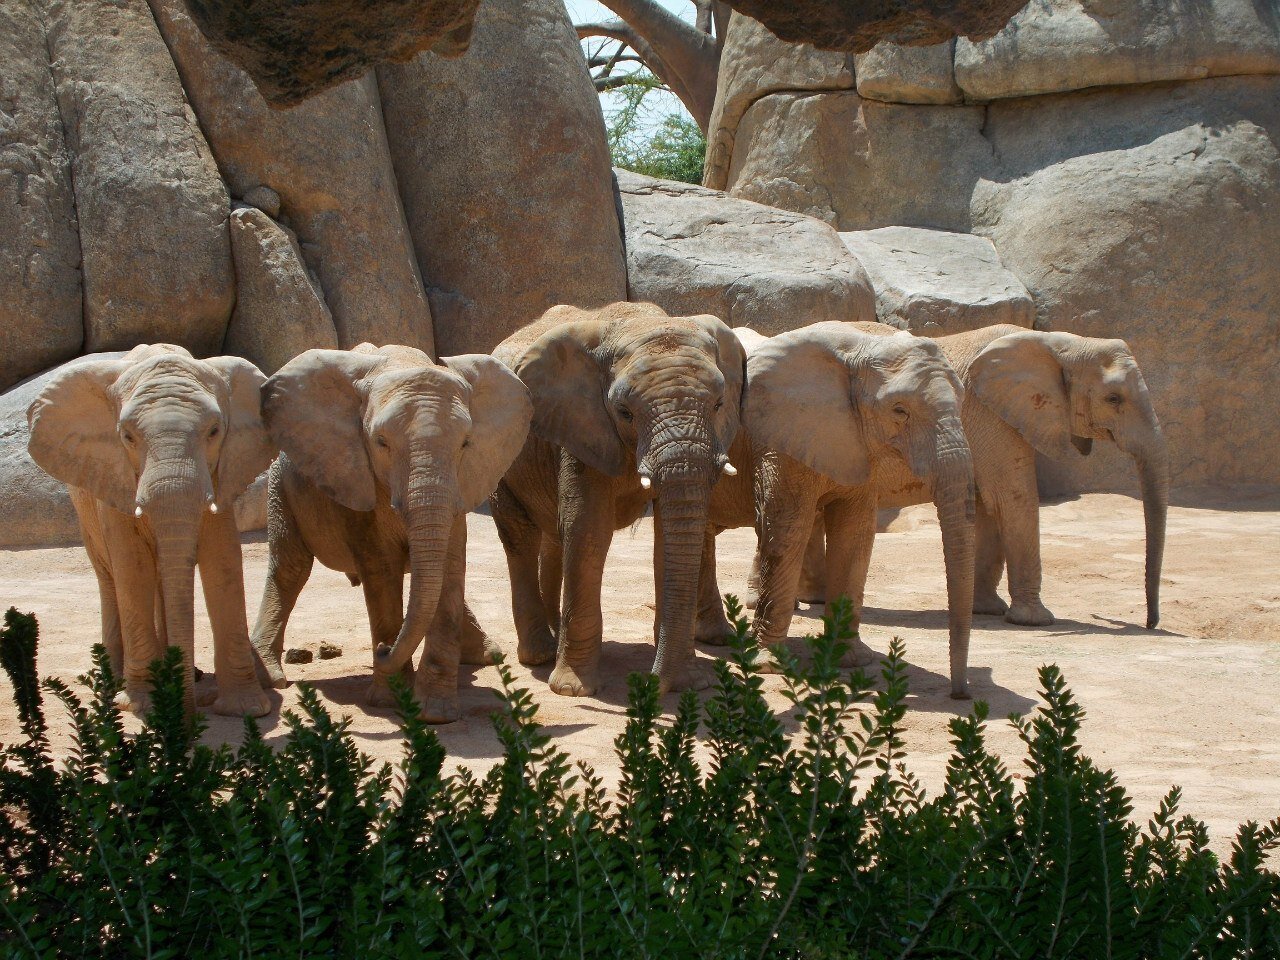 Elephants pose for photos with tourists